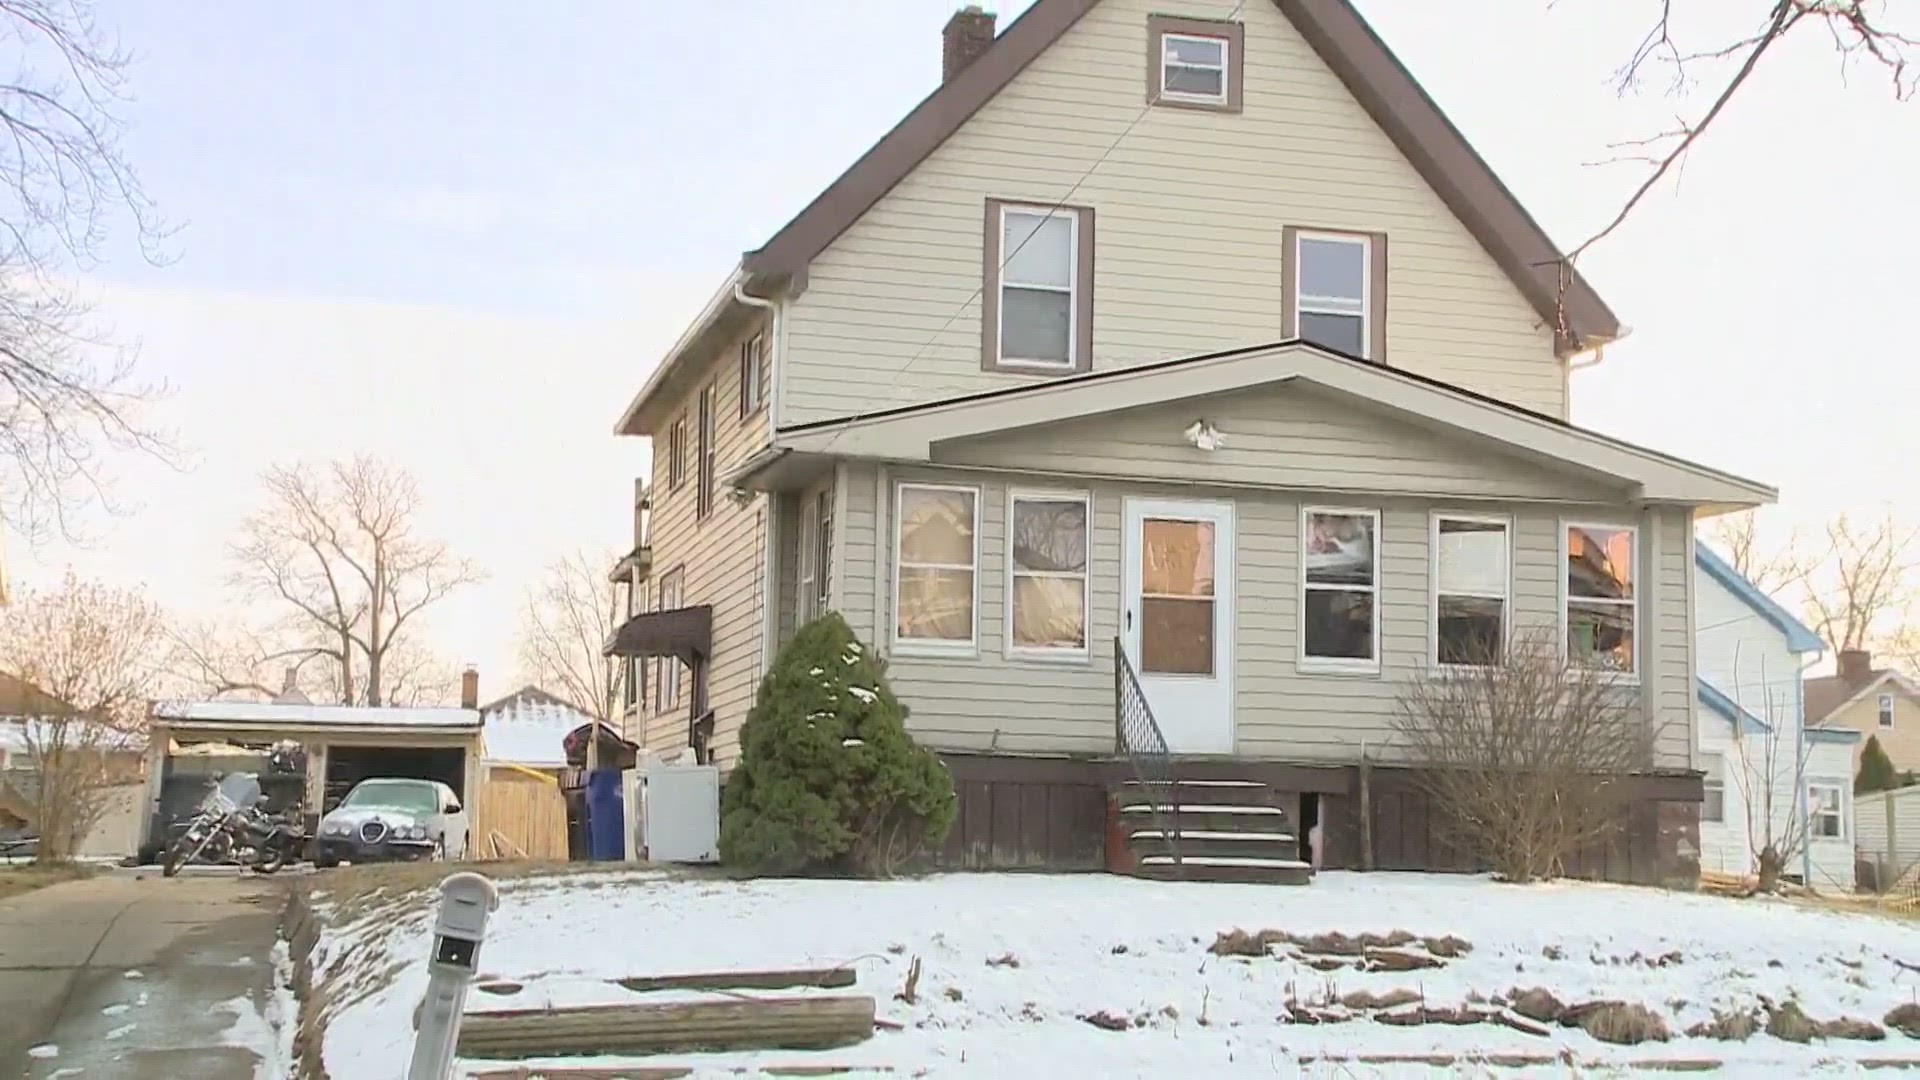 The shooting happened at a home on Gifford Avenue in Cleveland's Old Brooklyn neighborhood.